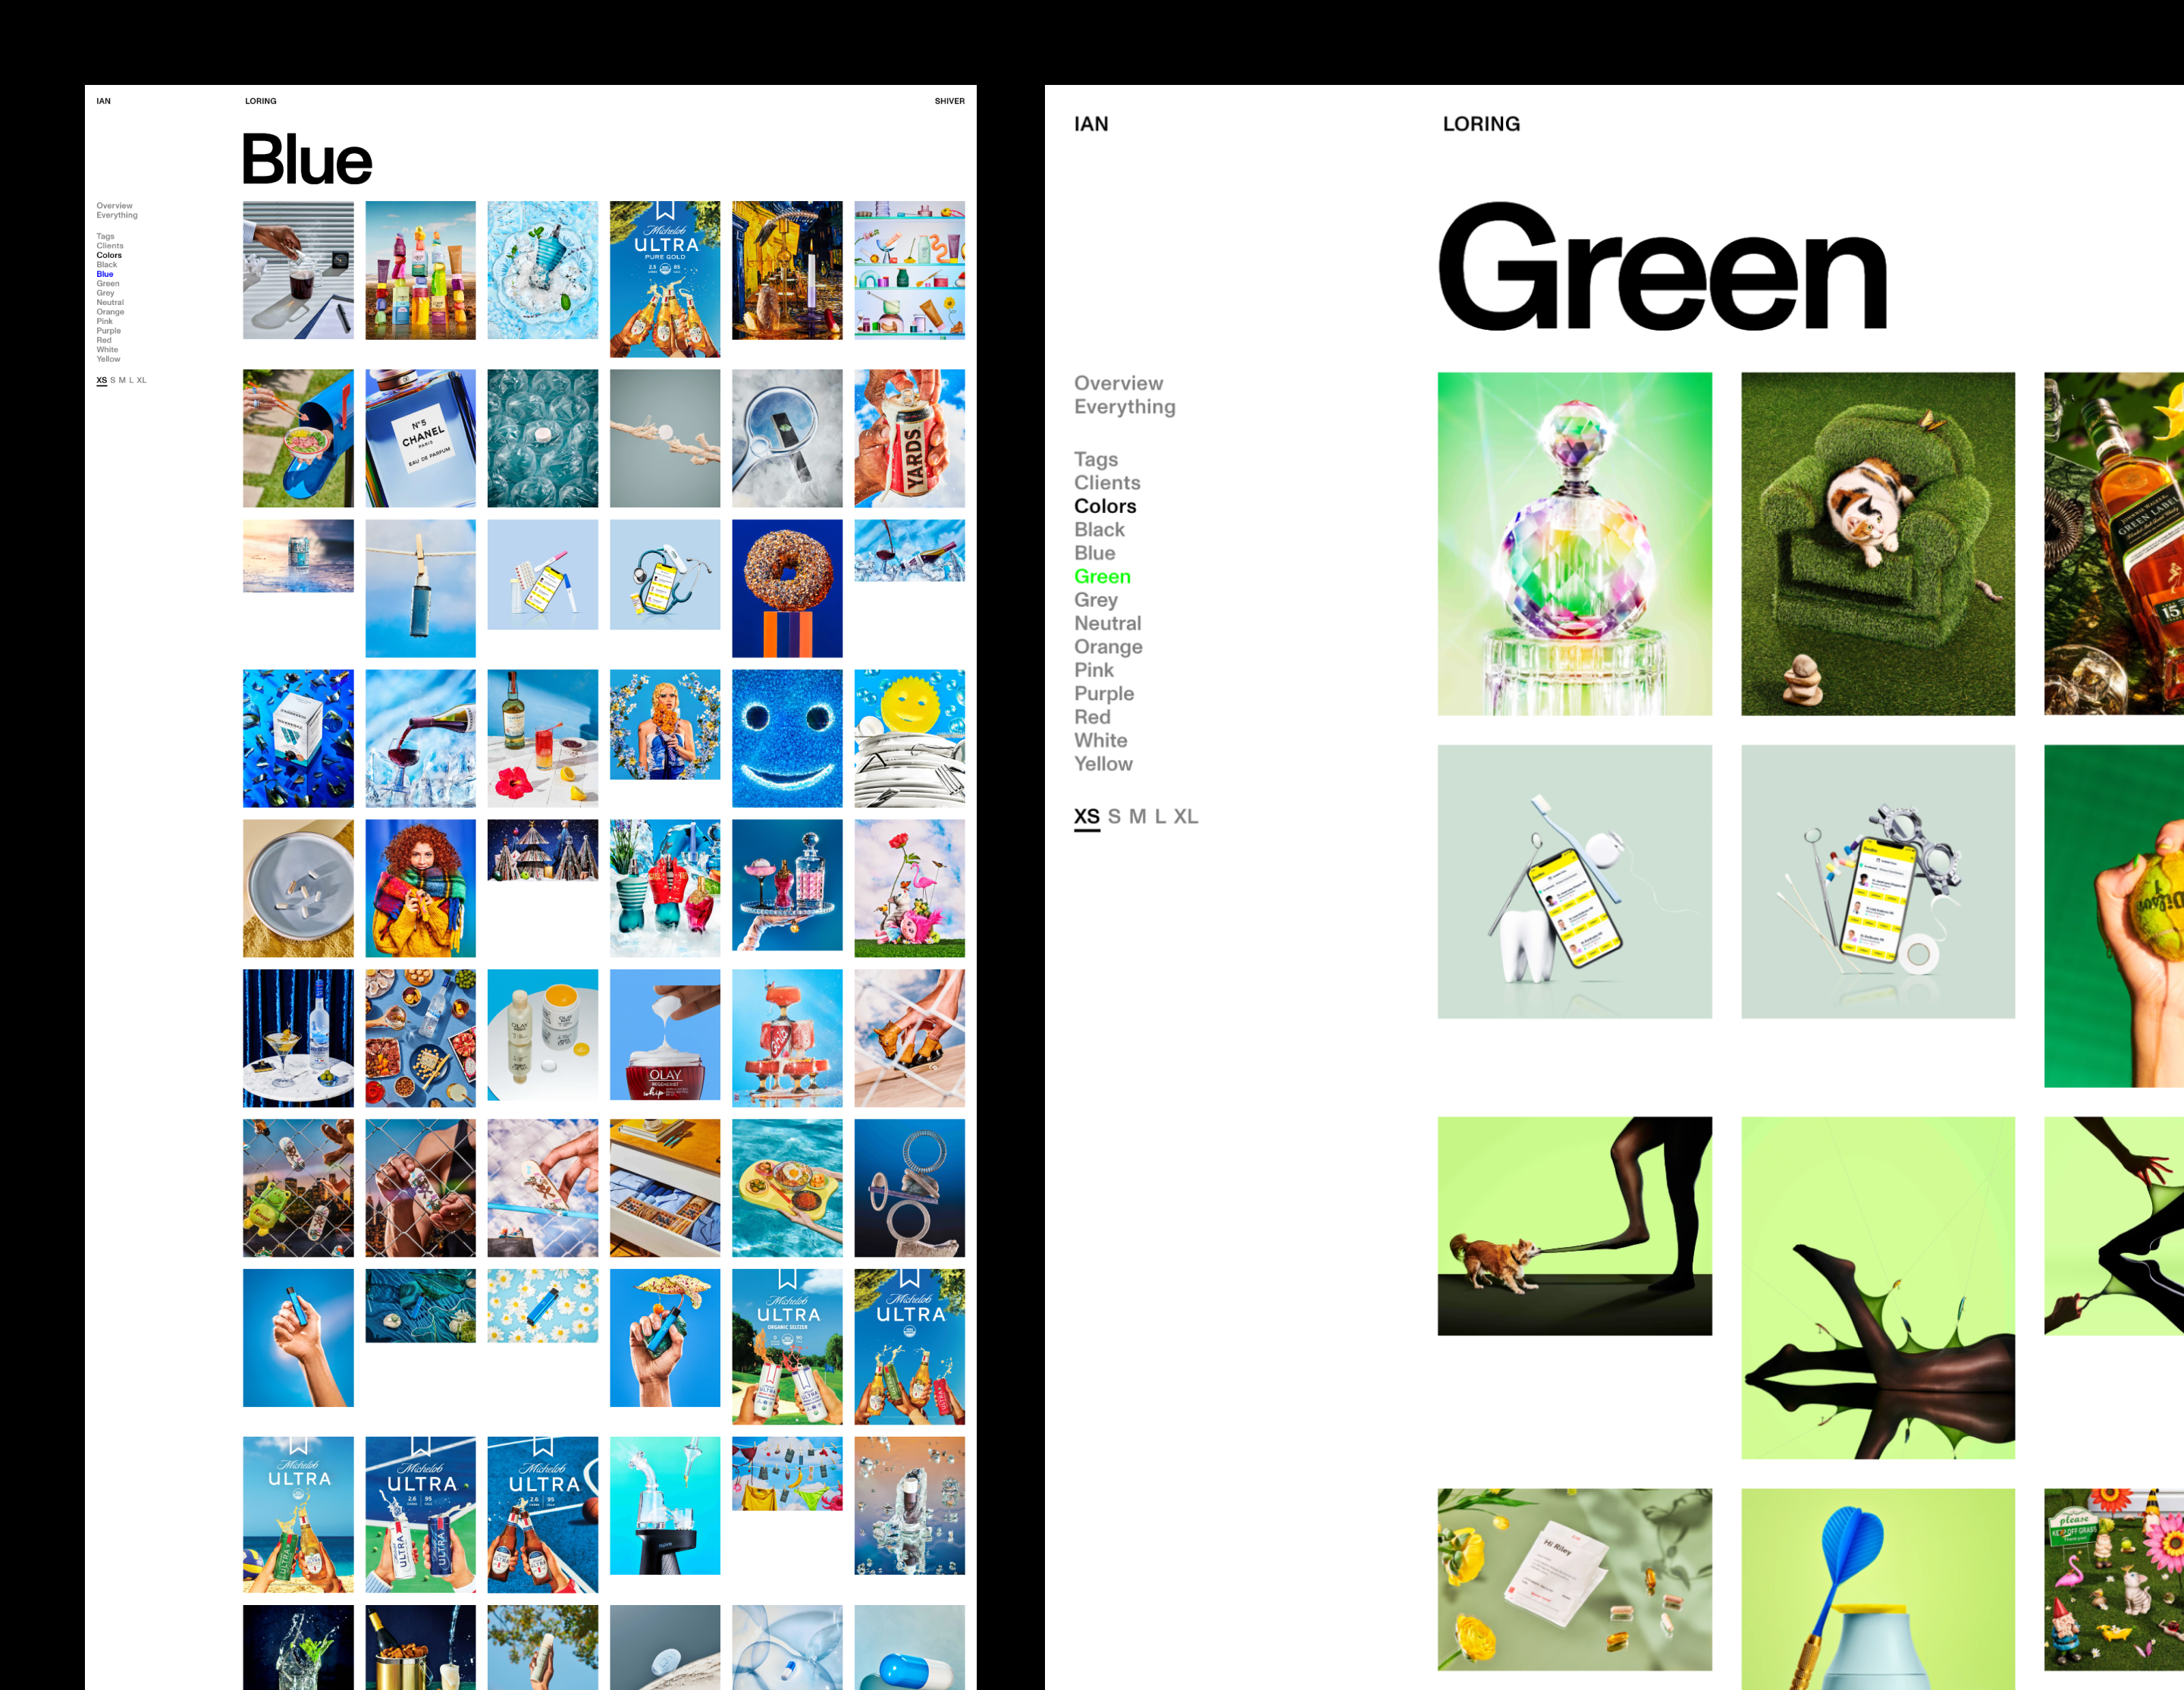 ian loring shiver portfolio website tagged by Blue and Green colors